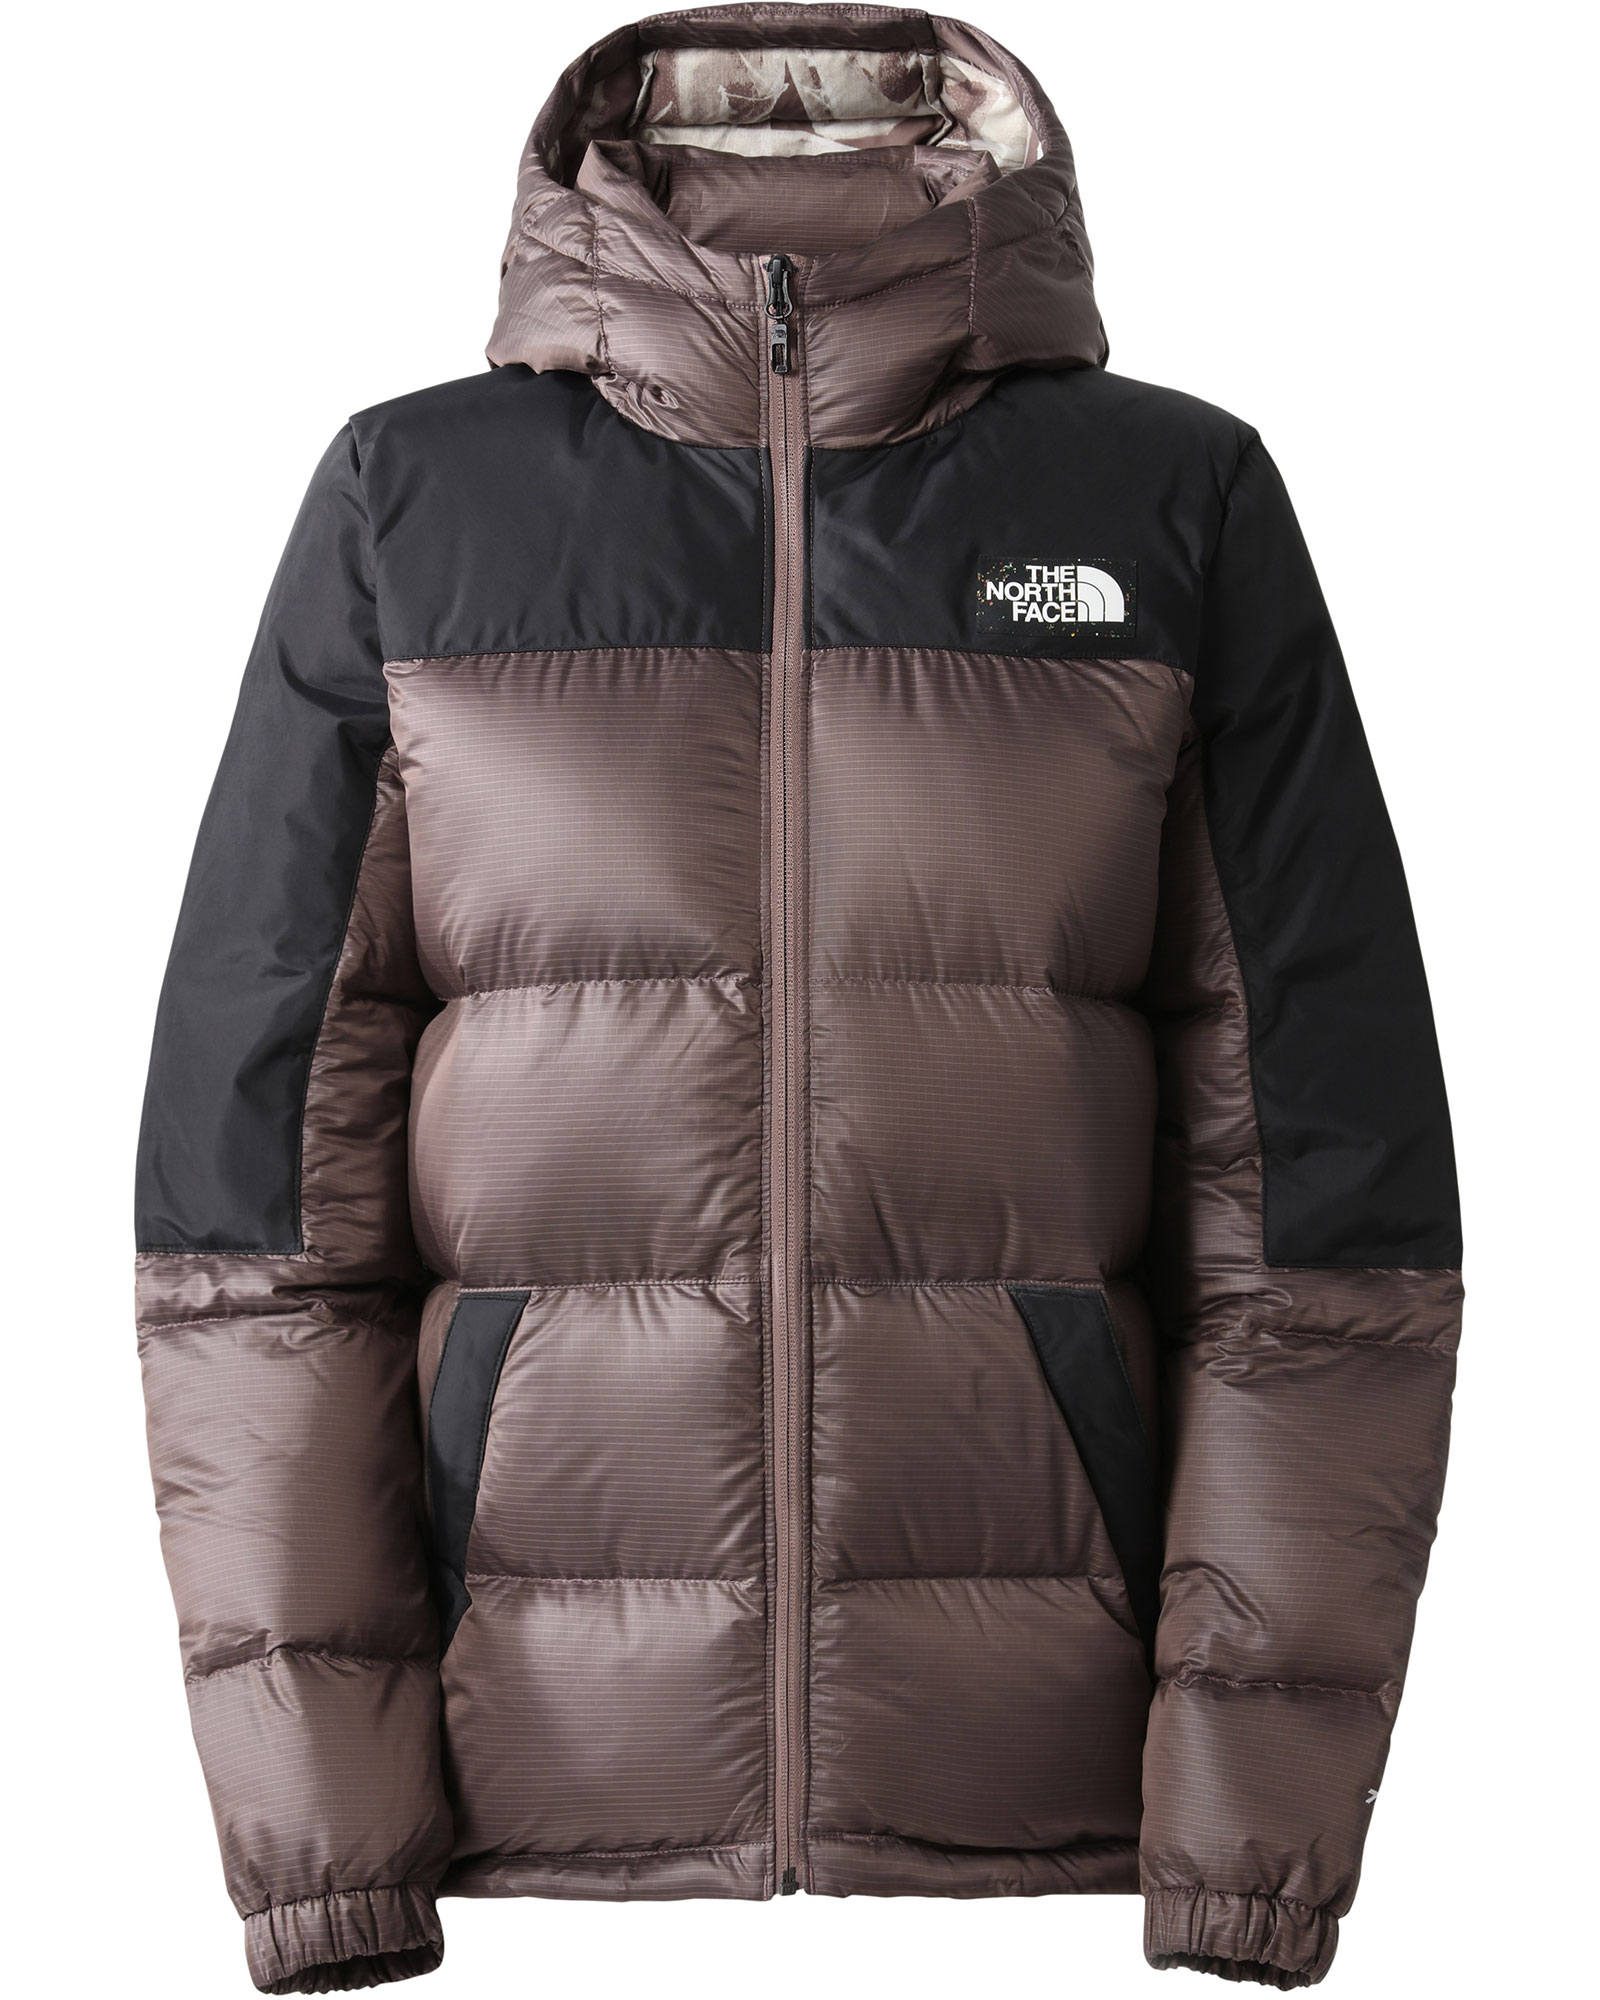 The North Face Diablo Recycled Women’s Down Hoodie - Deep Taupe XS